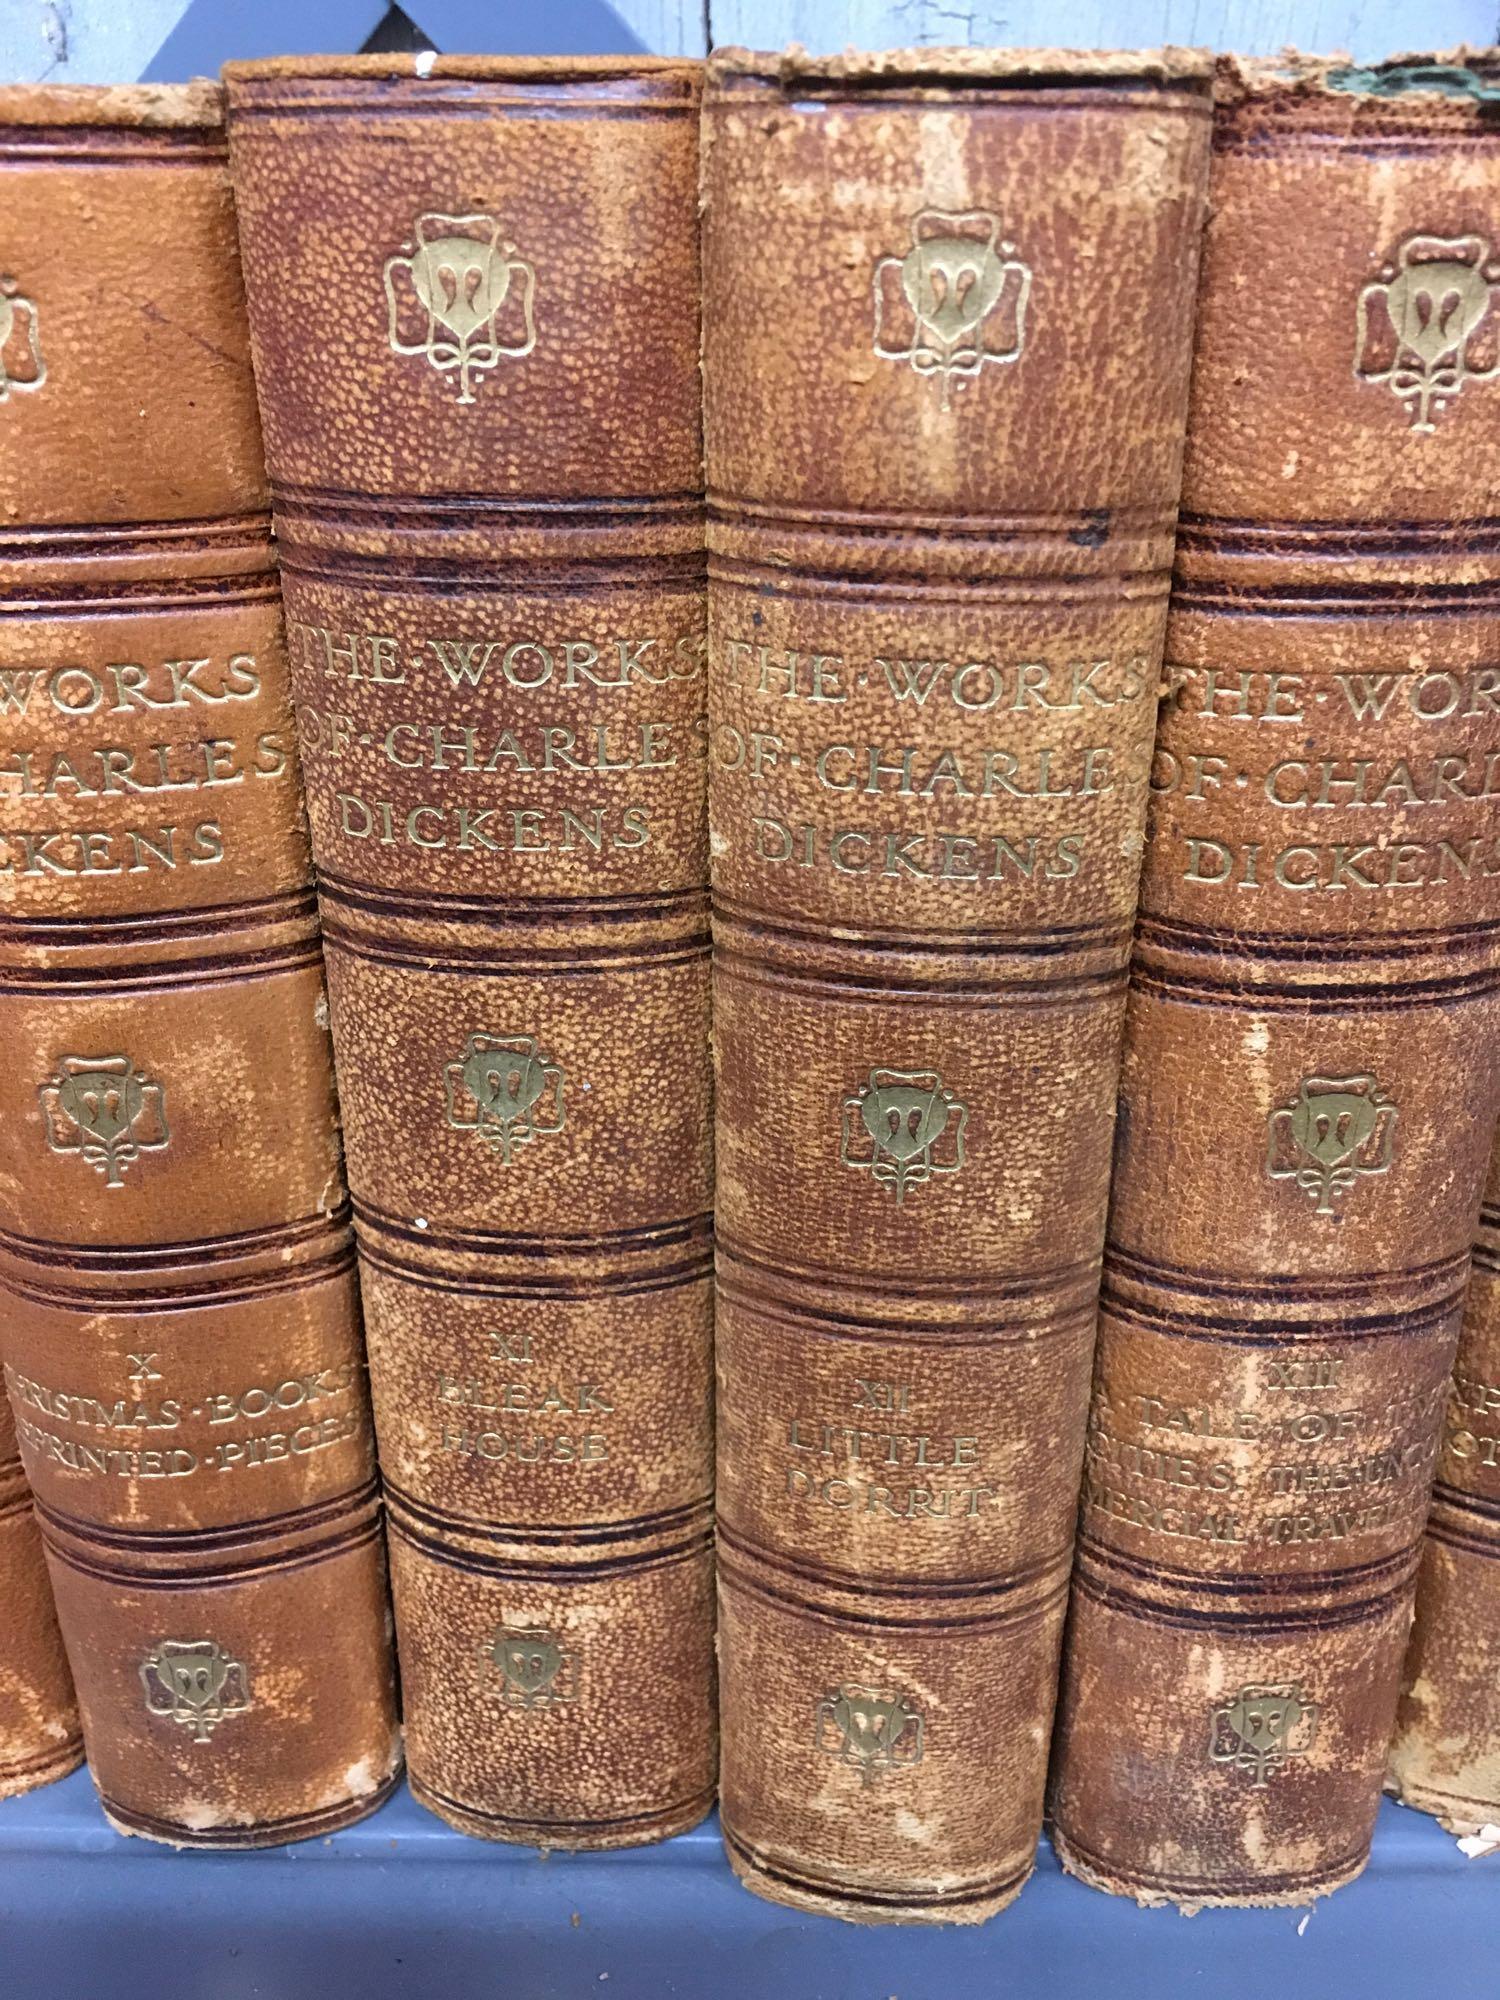 Vintage The Works Of Charles Dickens. Volume 1-20. See pics for titles